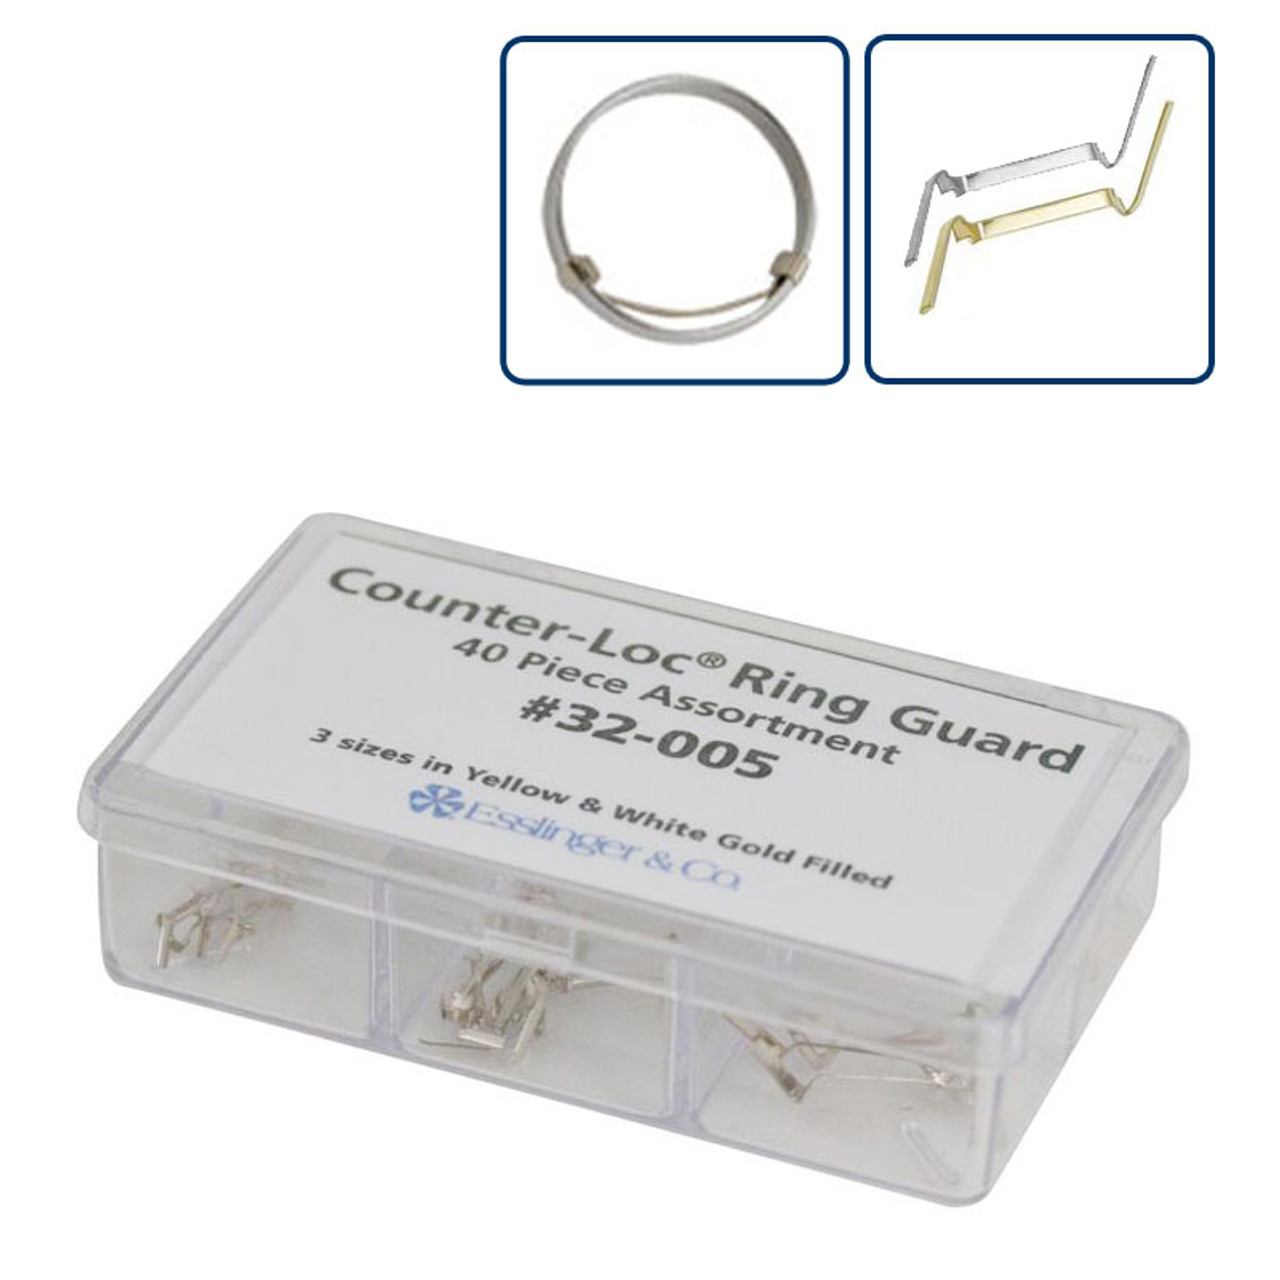 Counter-Loc Ring Guard Ring Sizer Assortment 32-005